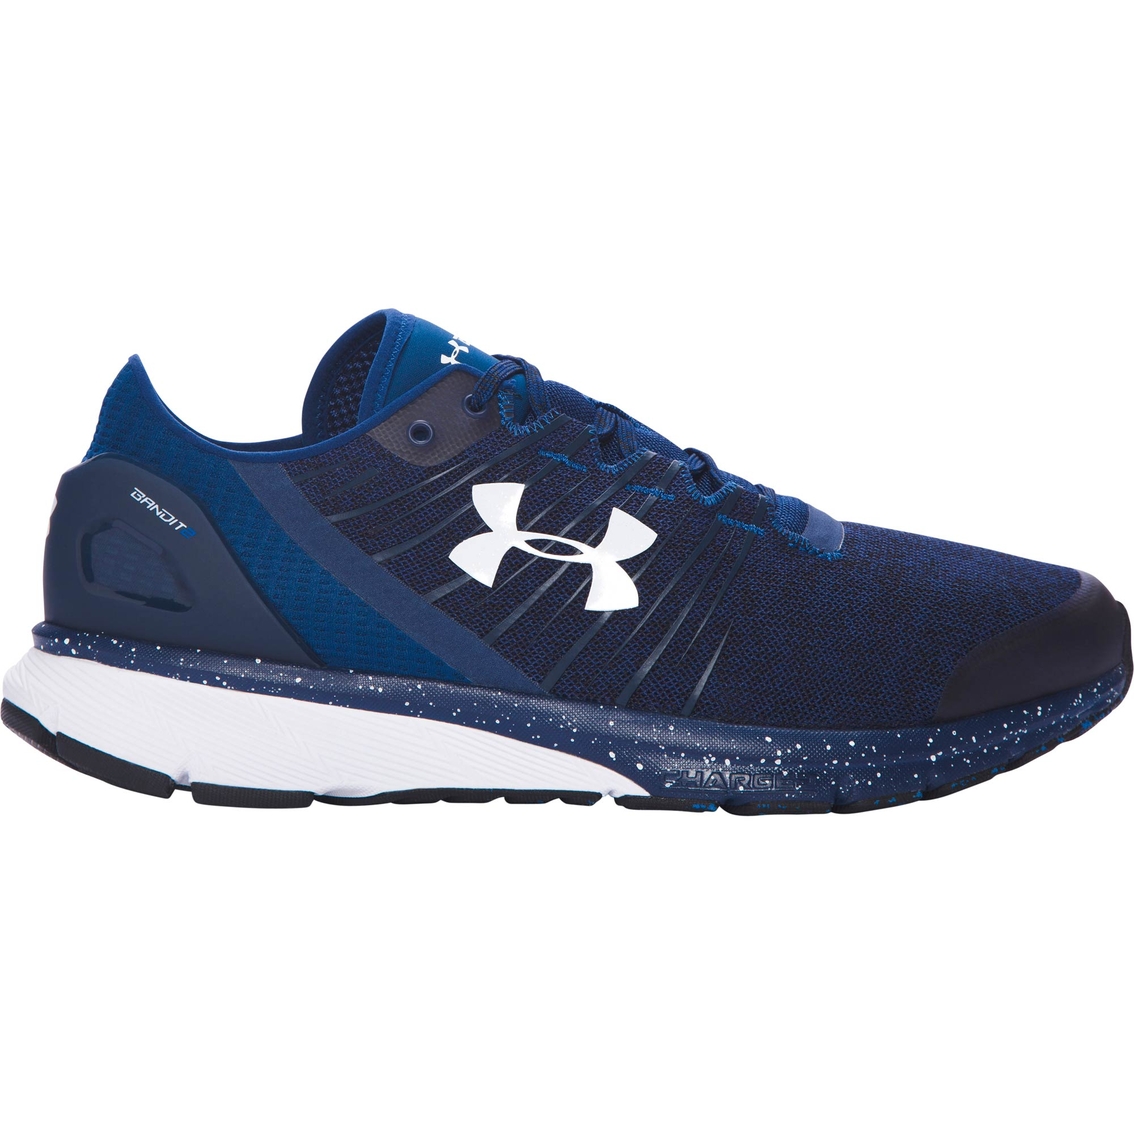 Under Armour Men's Charged Bandit 2 Shoes | Running | Shoes | Shop The ...